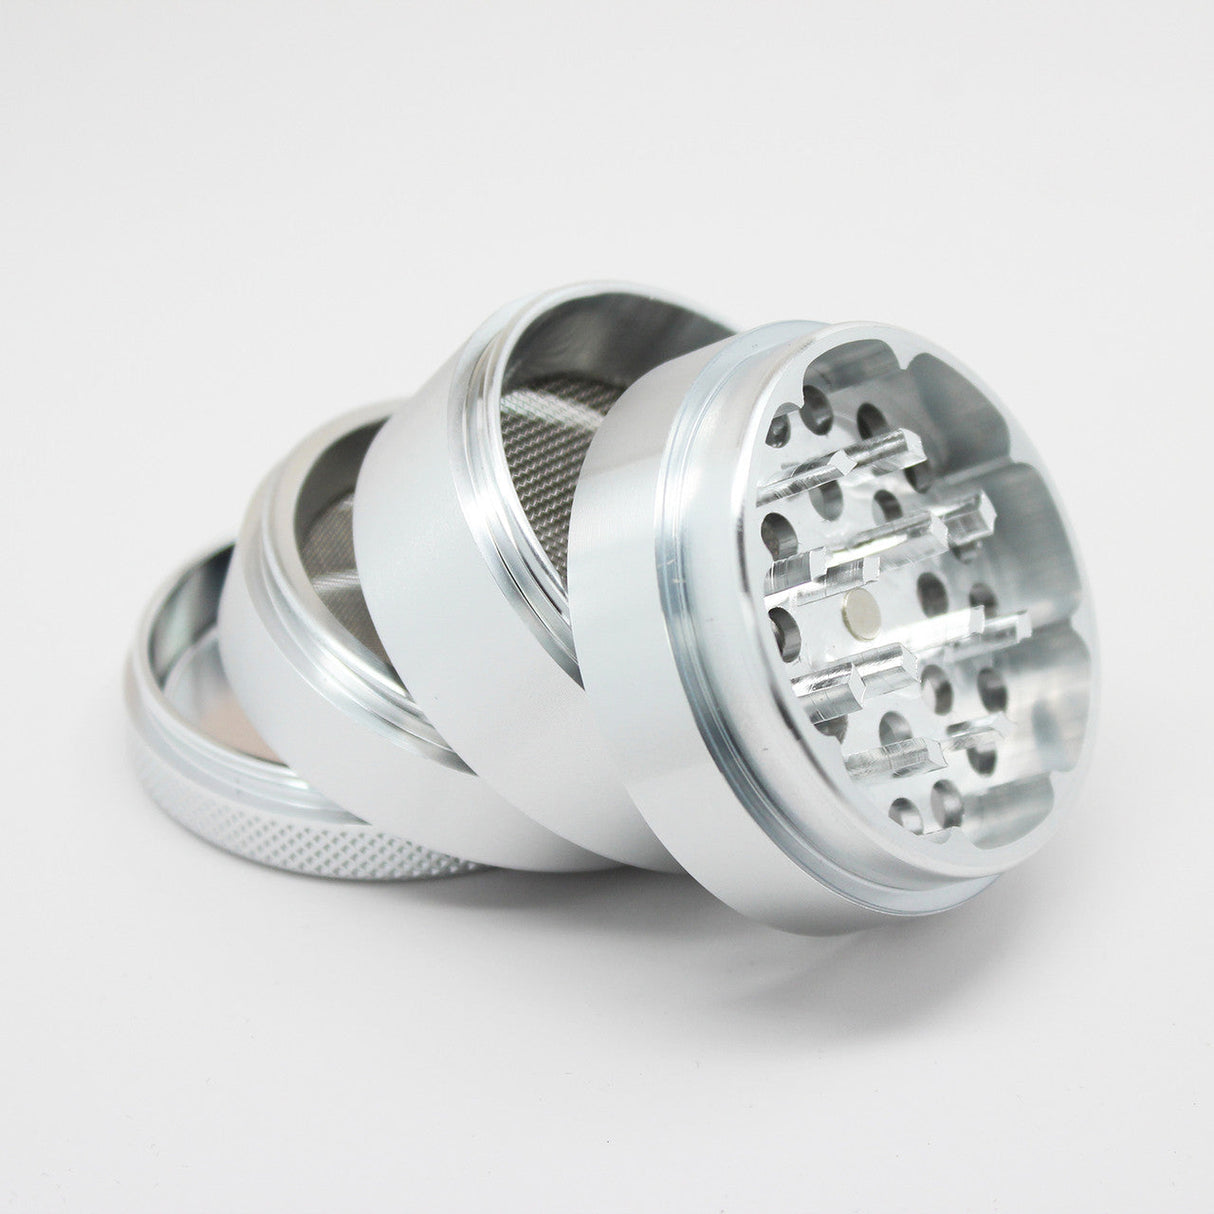 Sharpstone 5 Piece Hard Top Grinder in Silver, Portable Aluminum Herb Grinder - Angled View